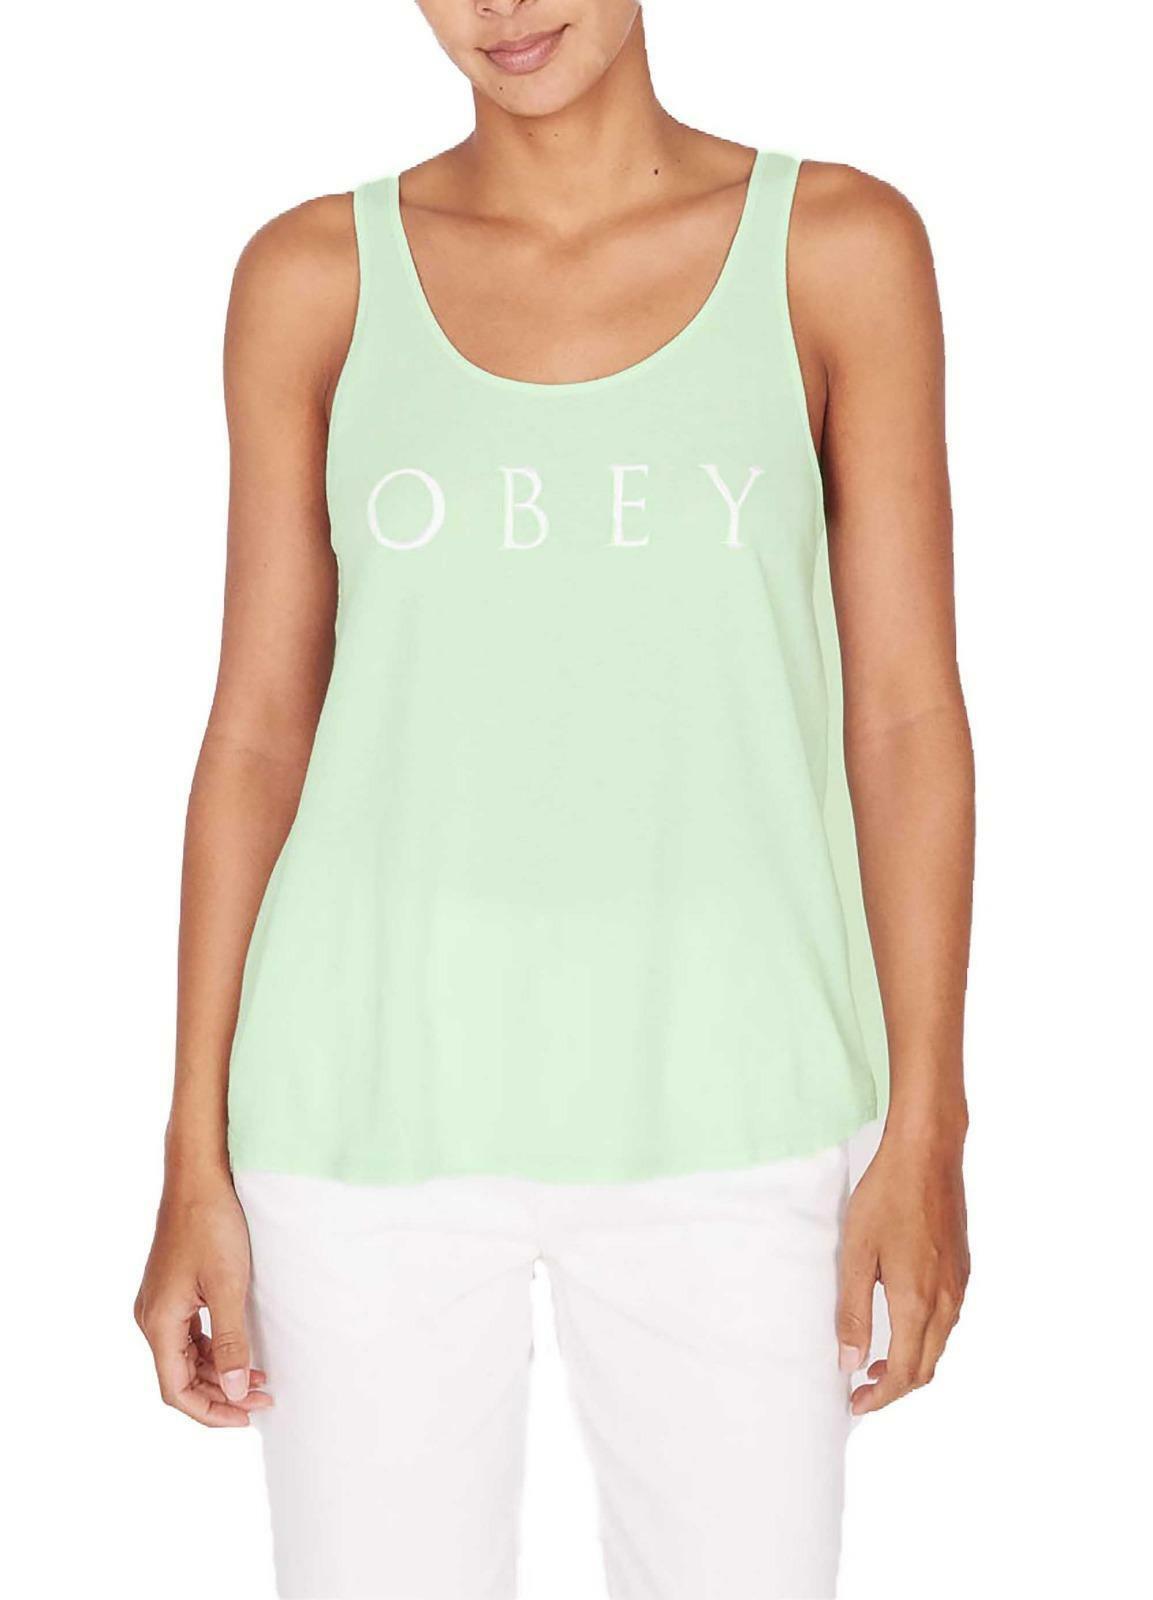 obey obey canotta donna verde 22119w232